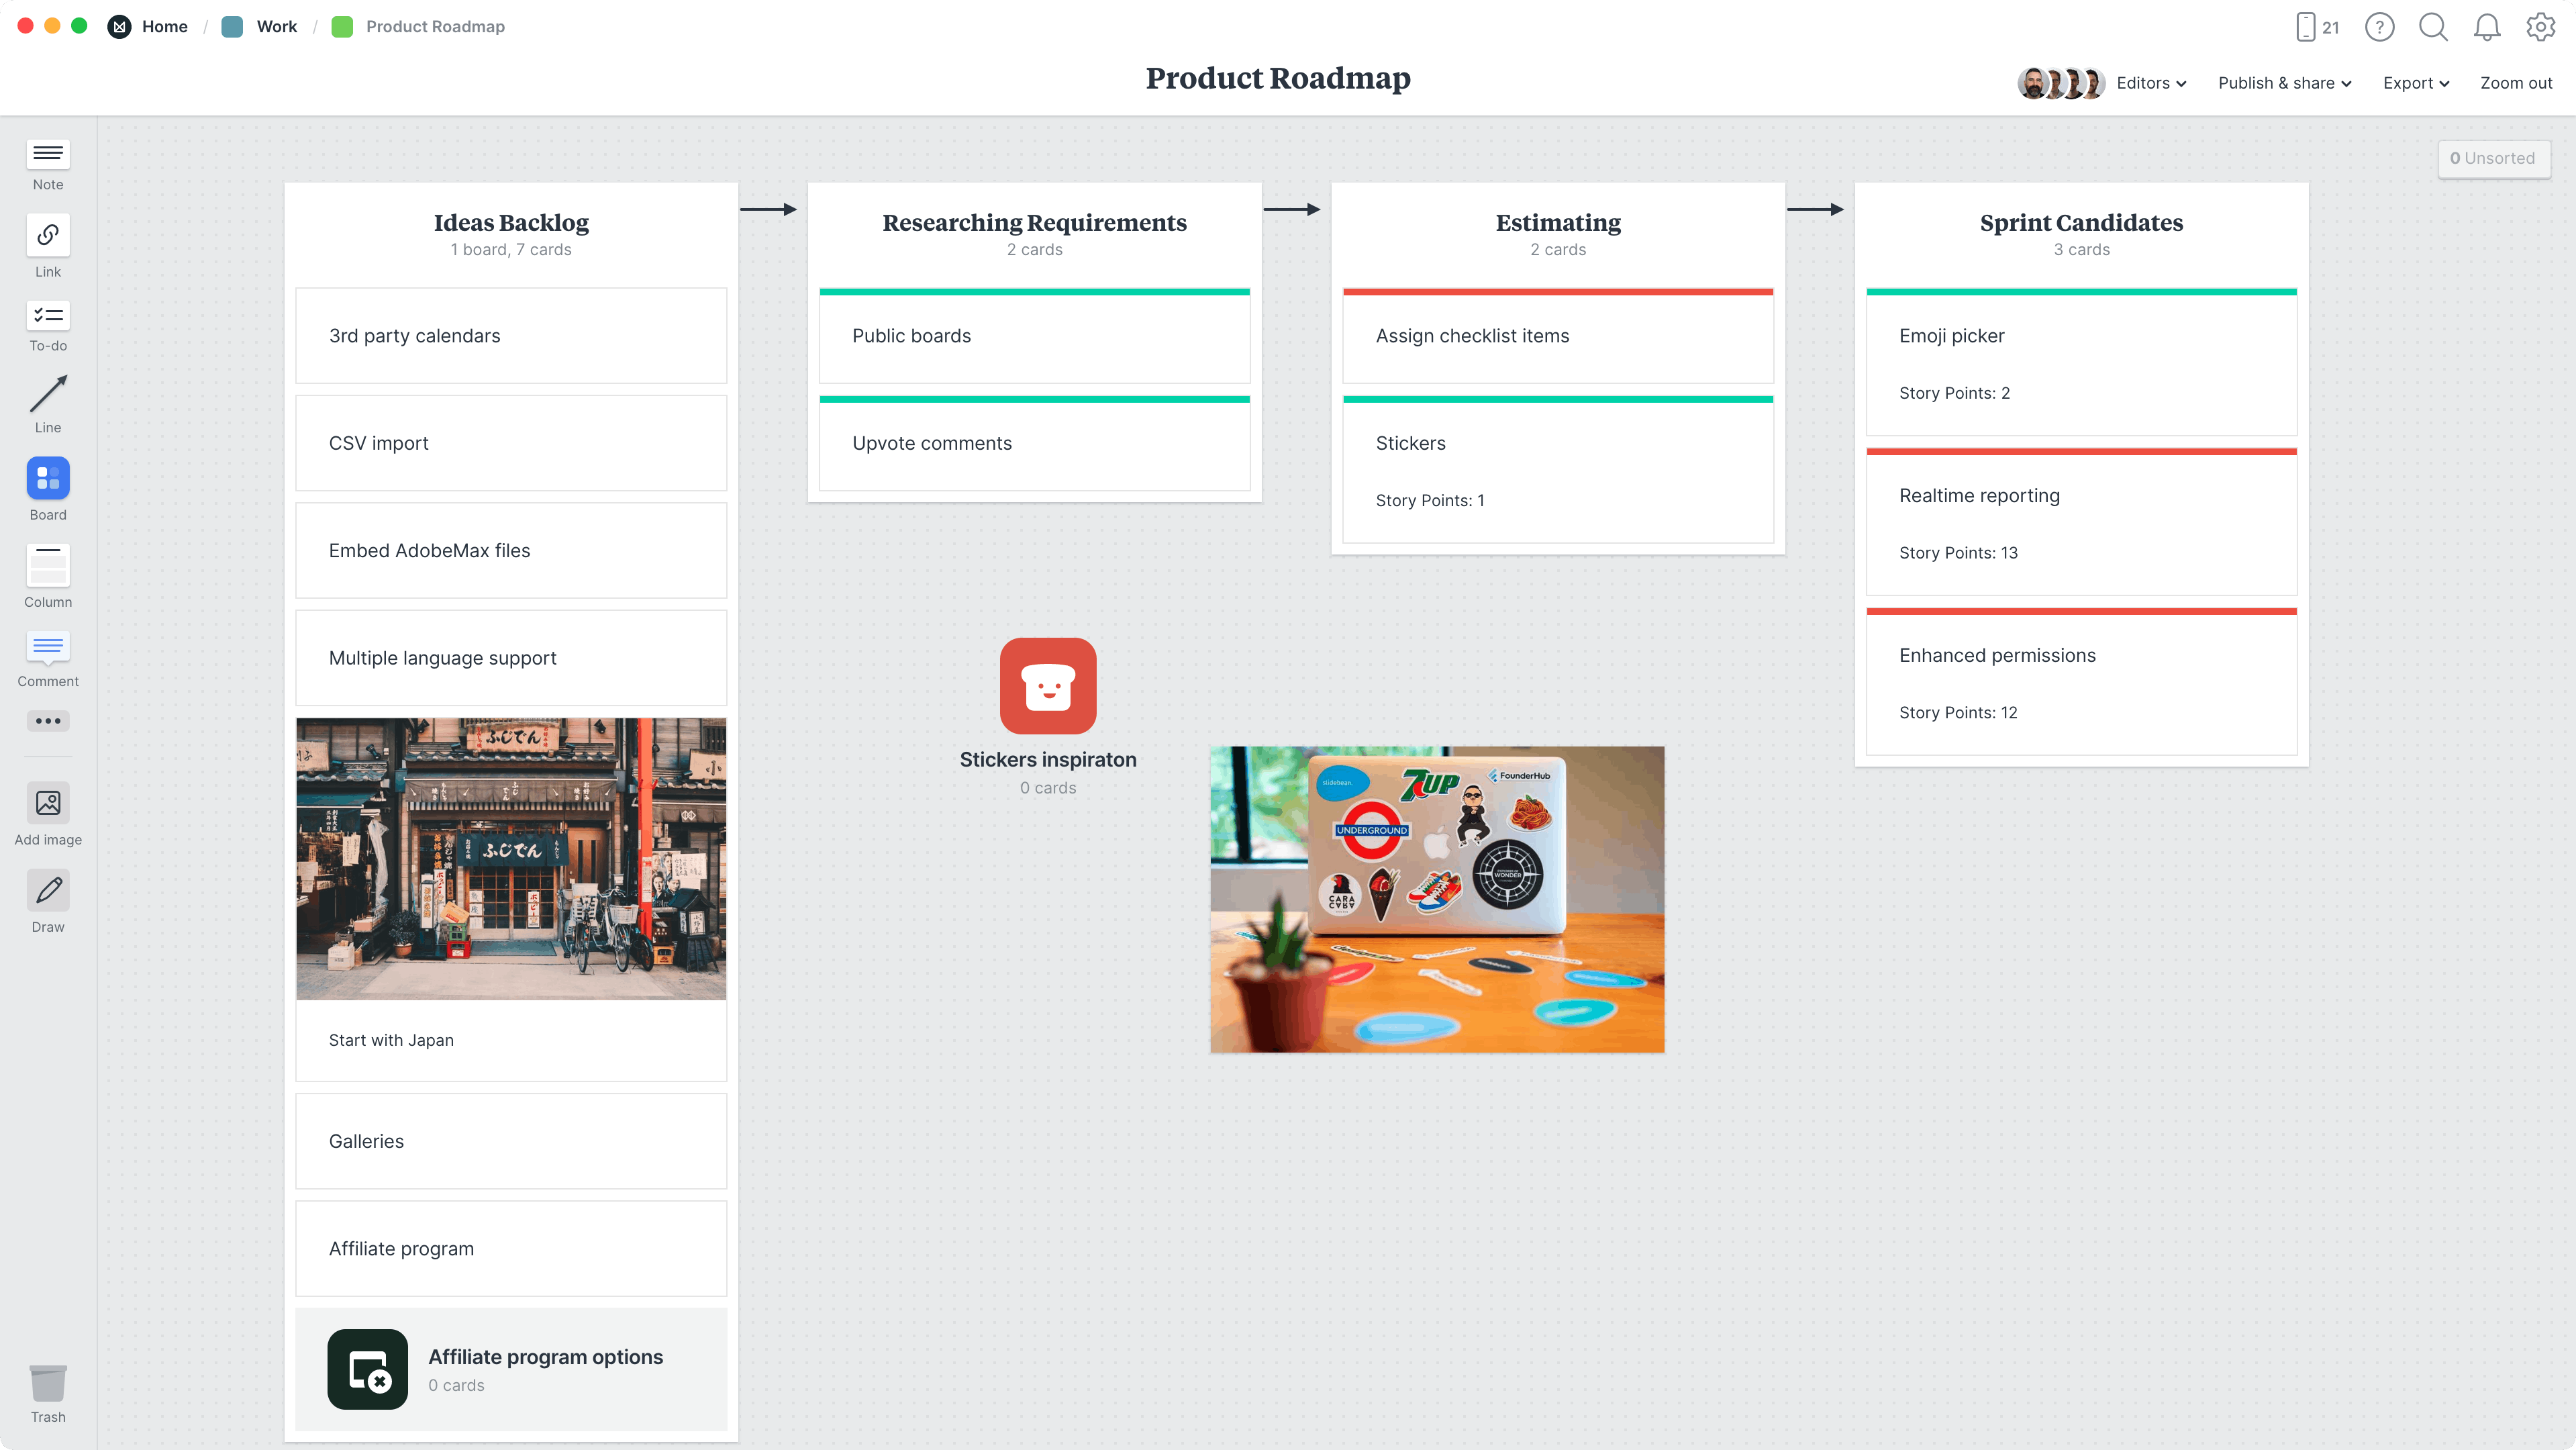 Product Roadmap Template, within the Milanote app